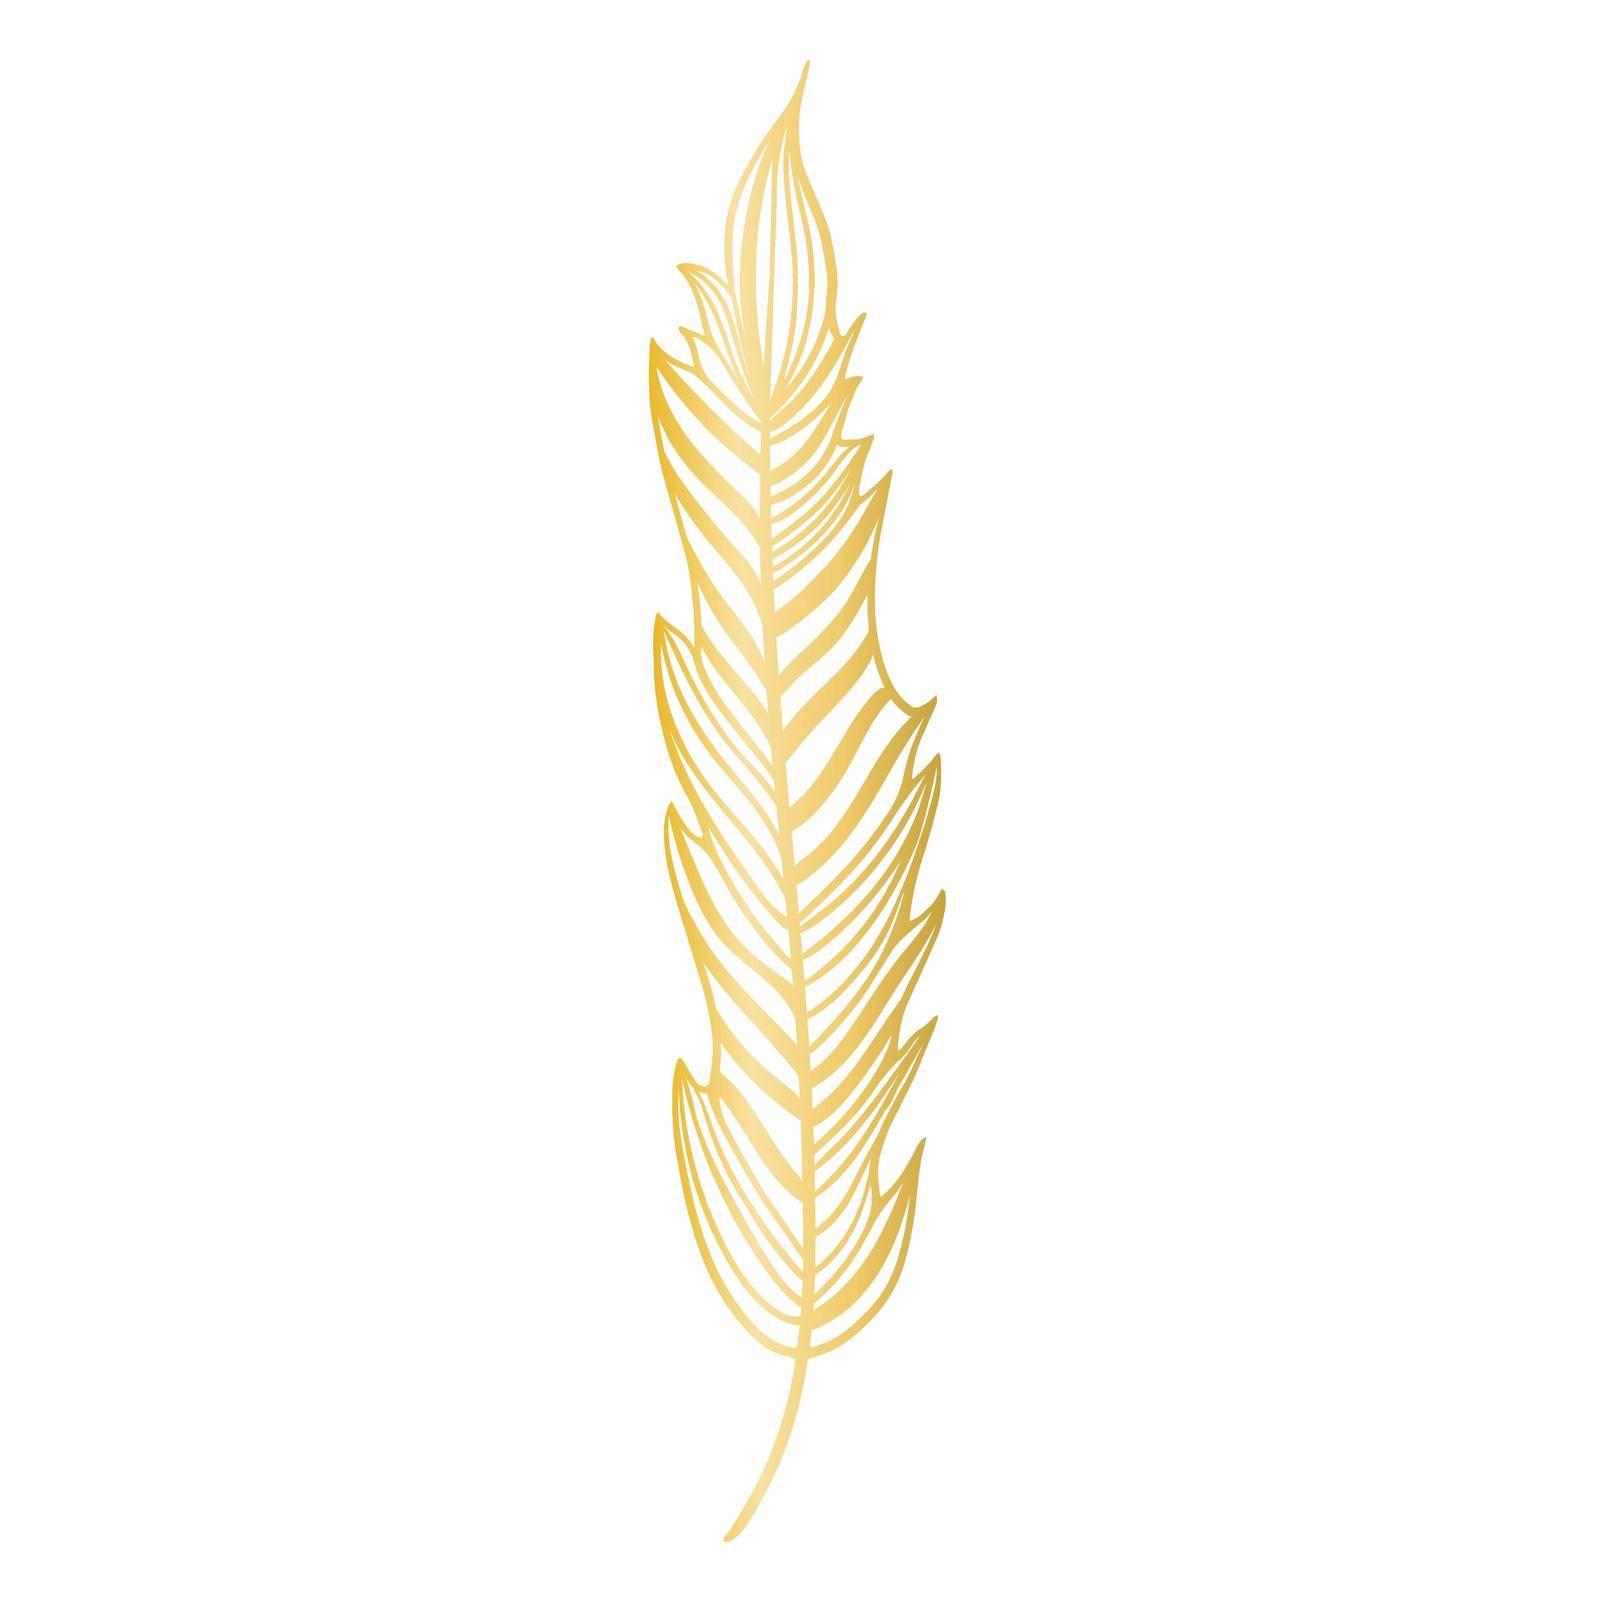 Golden drawn striped feather isolated vector illustration by TassiaK